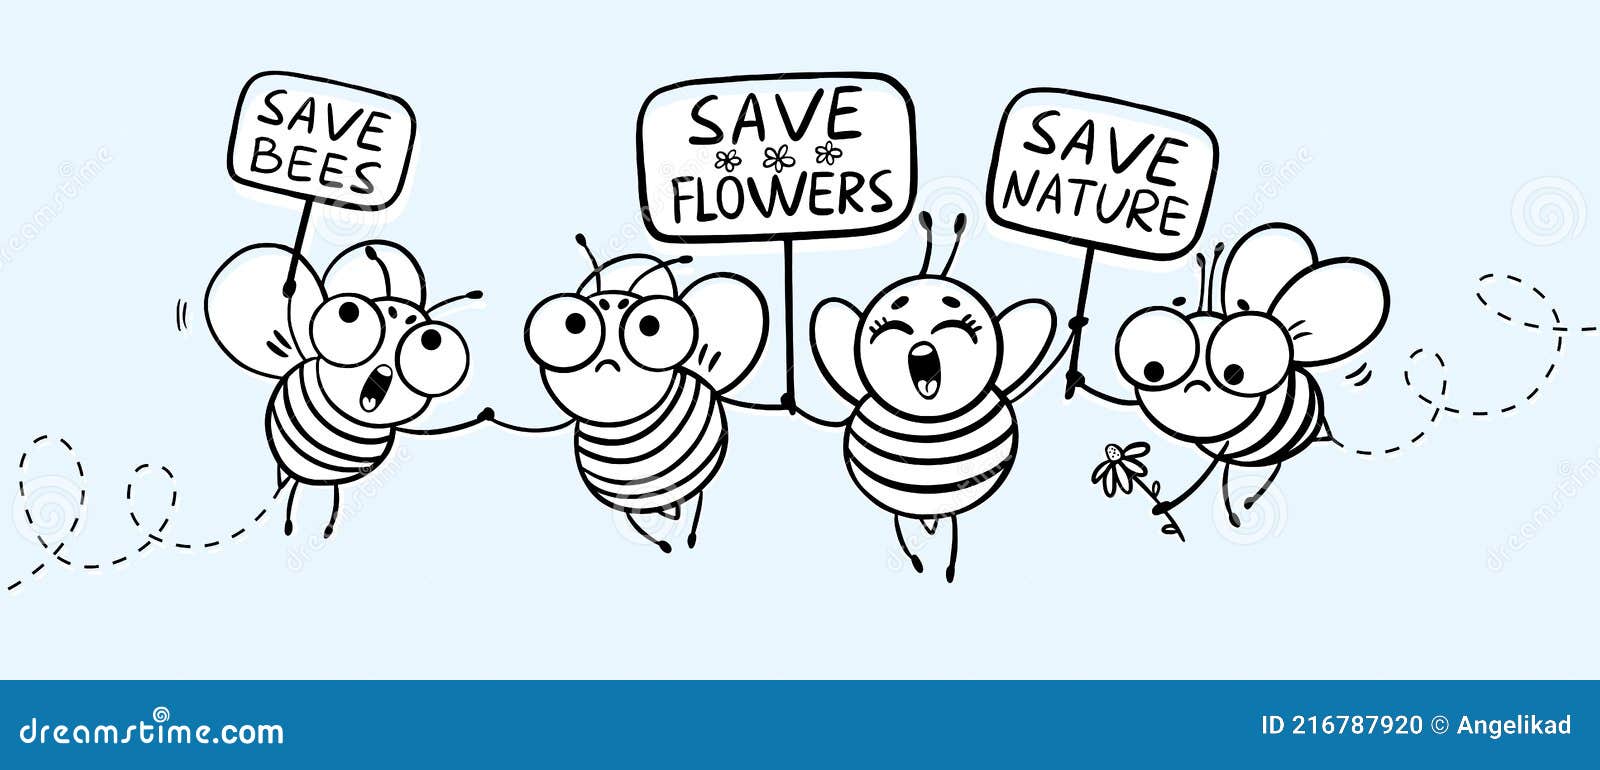 save the bees - funny bees drawing.  with cute cartoon bees and signboards.